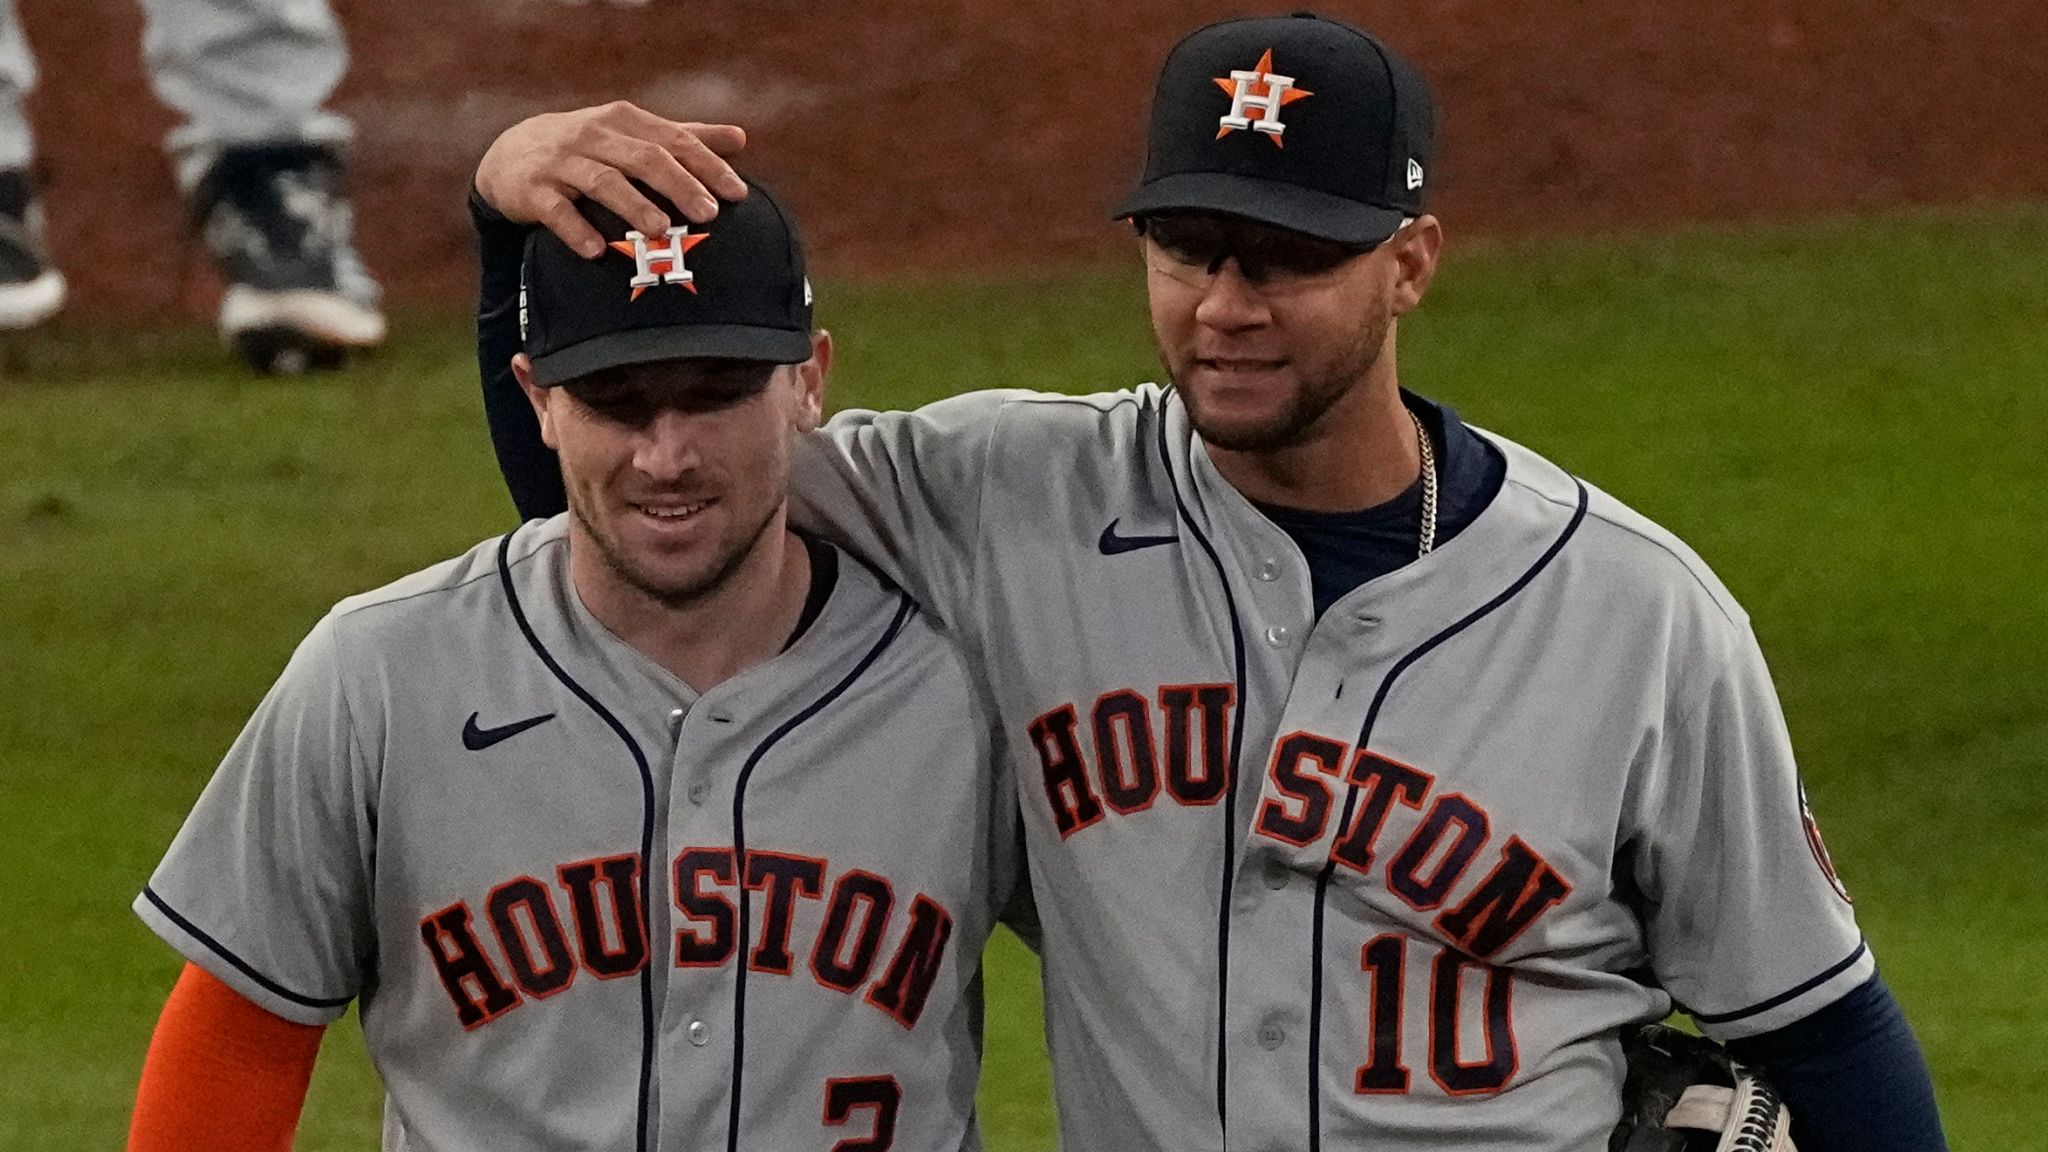 World Series: Houston Astros level best-of-seven series with